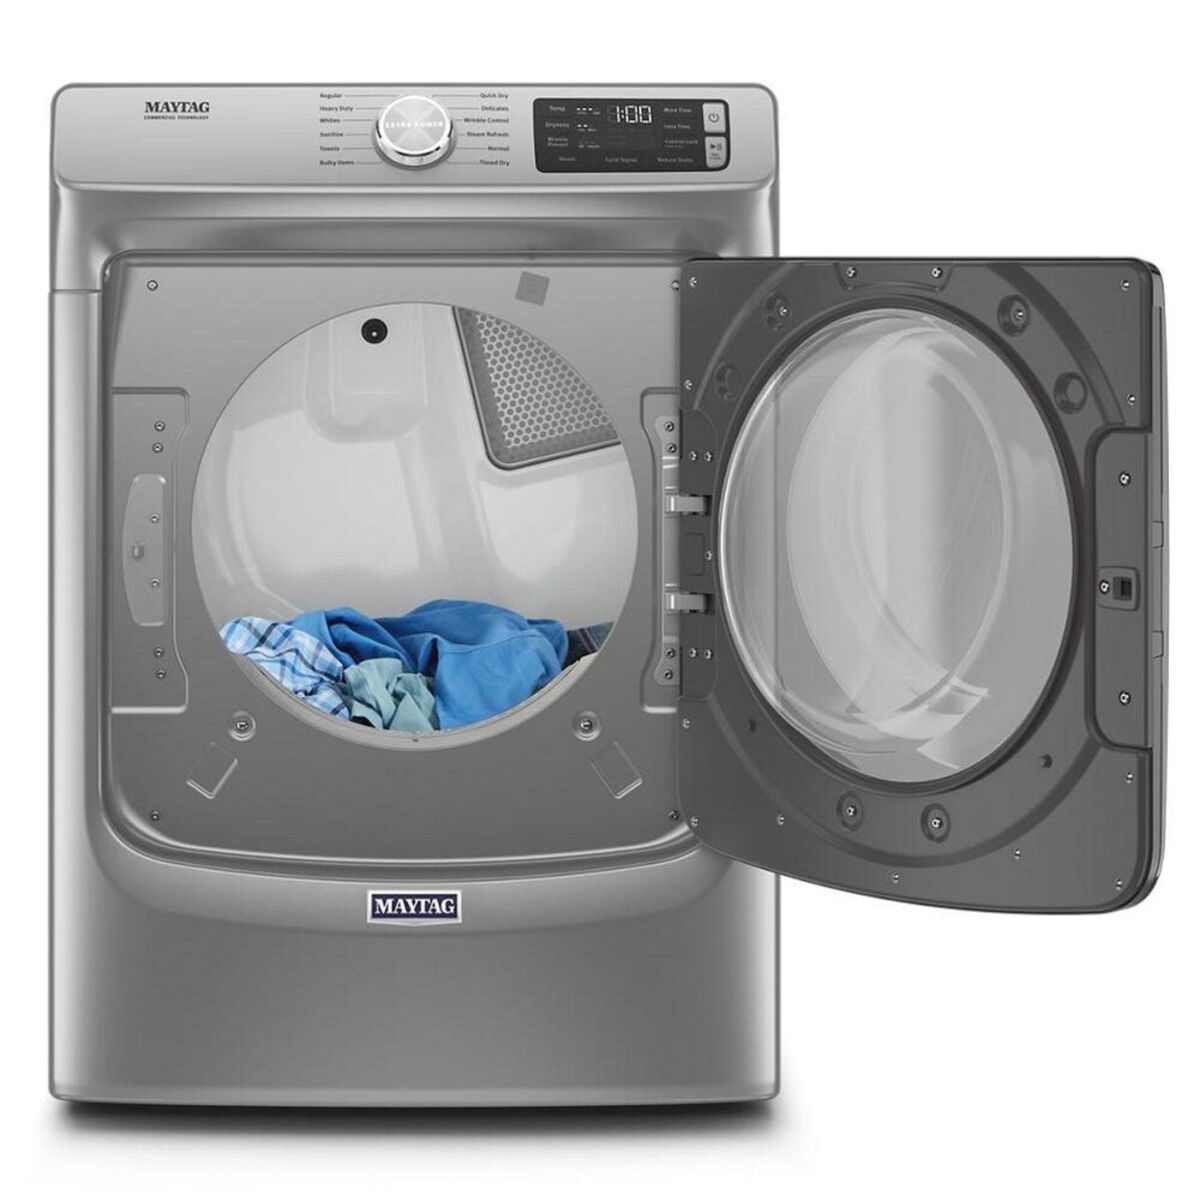 How To Fix The Error Code F22 For Maytag Washing Machine